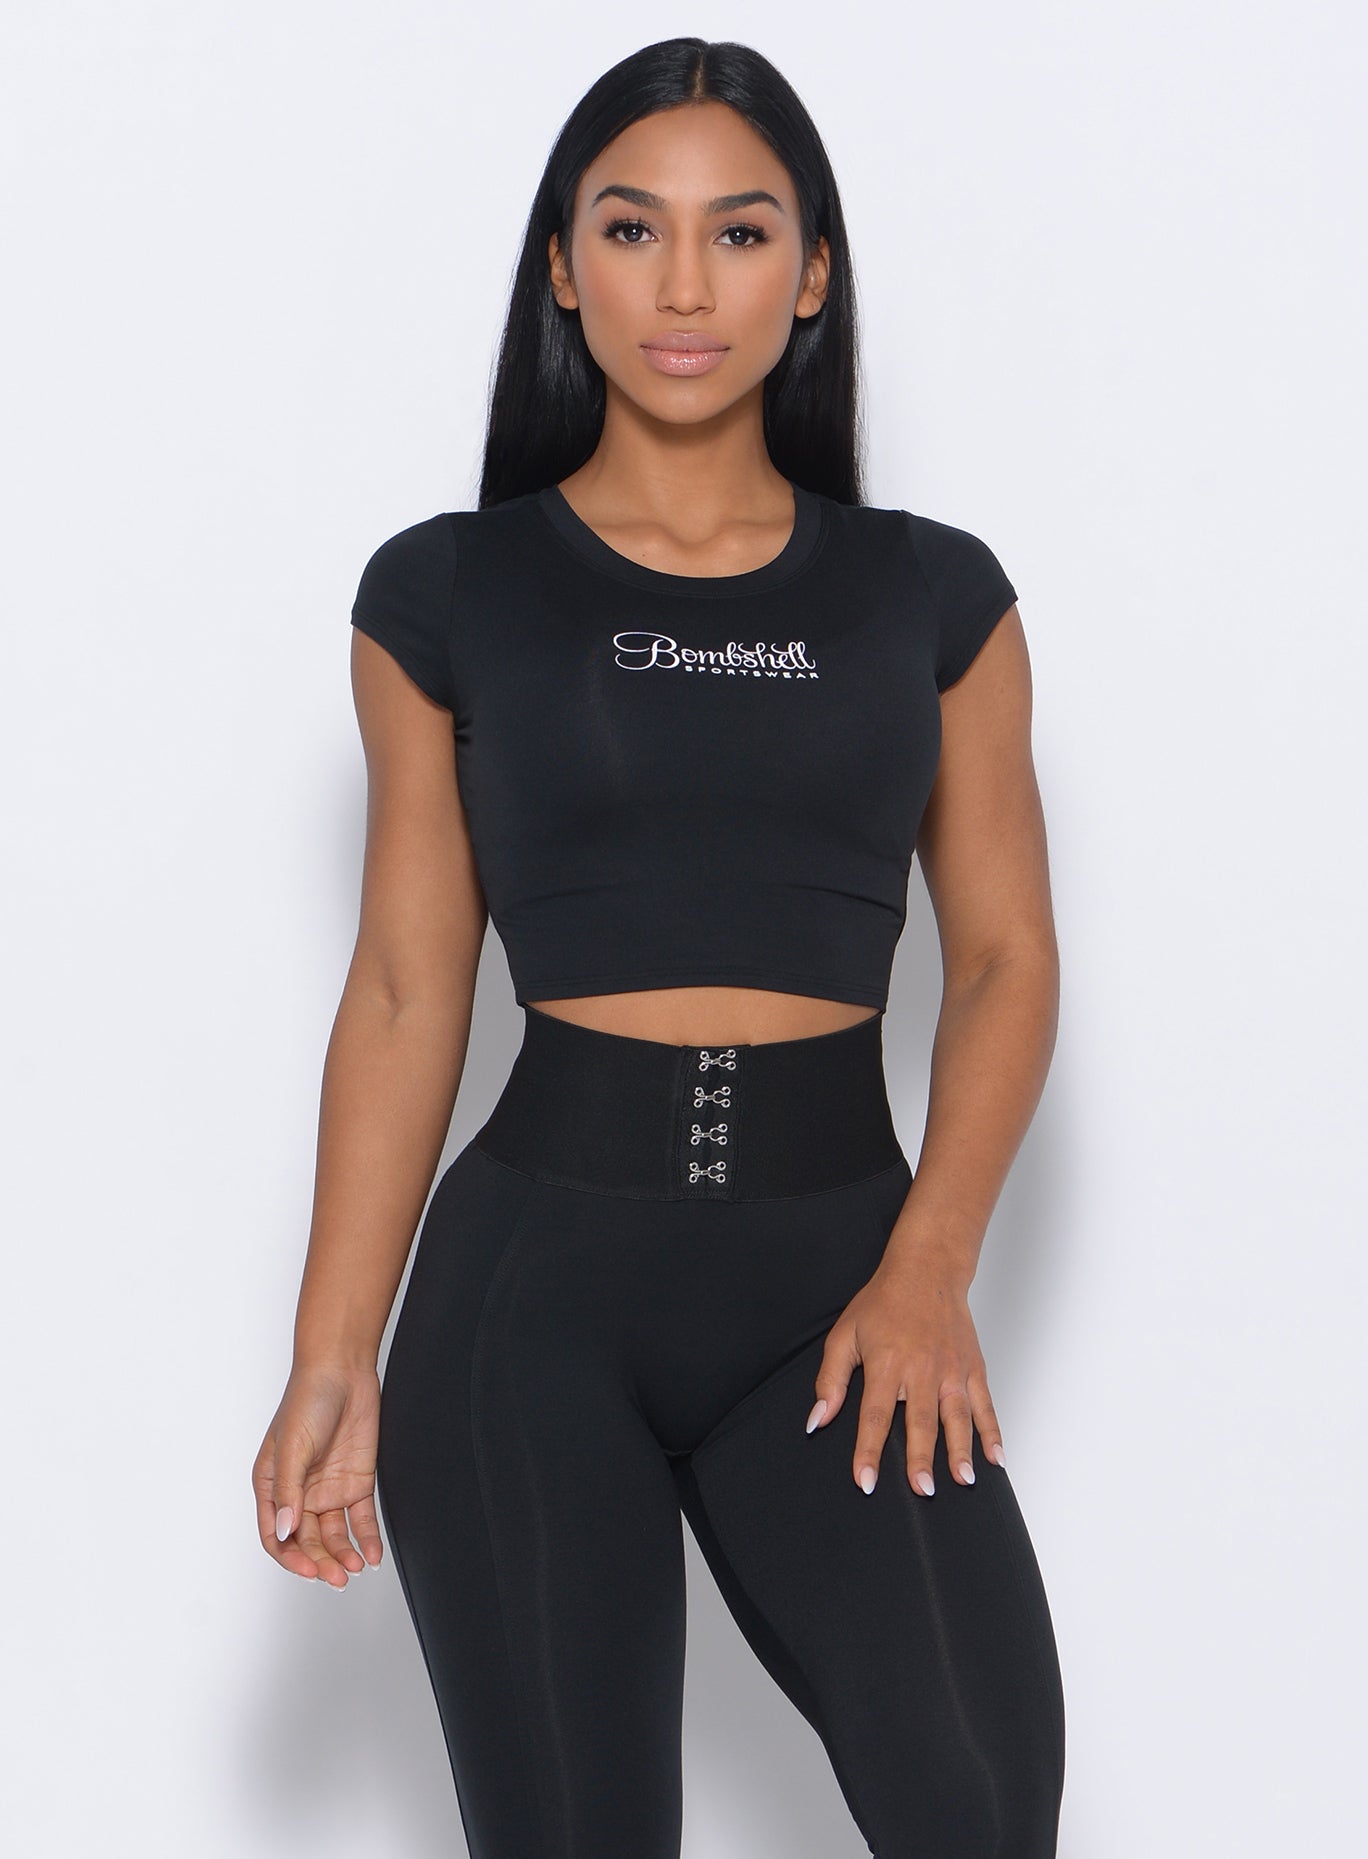 Front profile of the model in our black fit fam tee and a matching leggings 